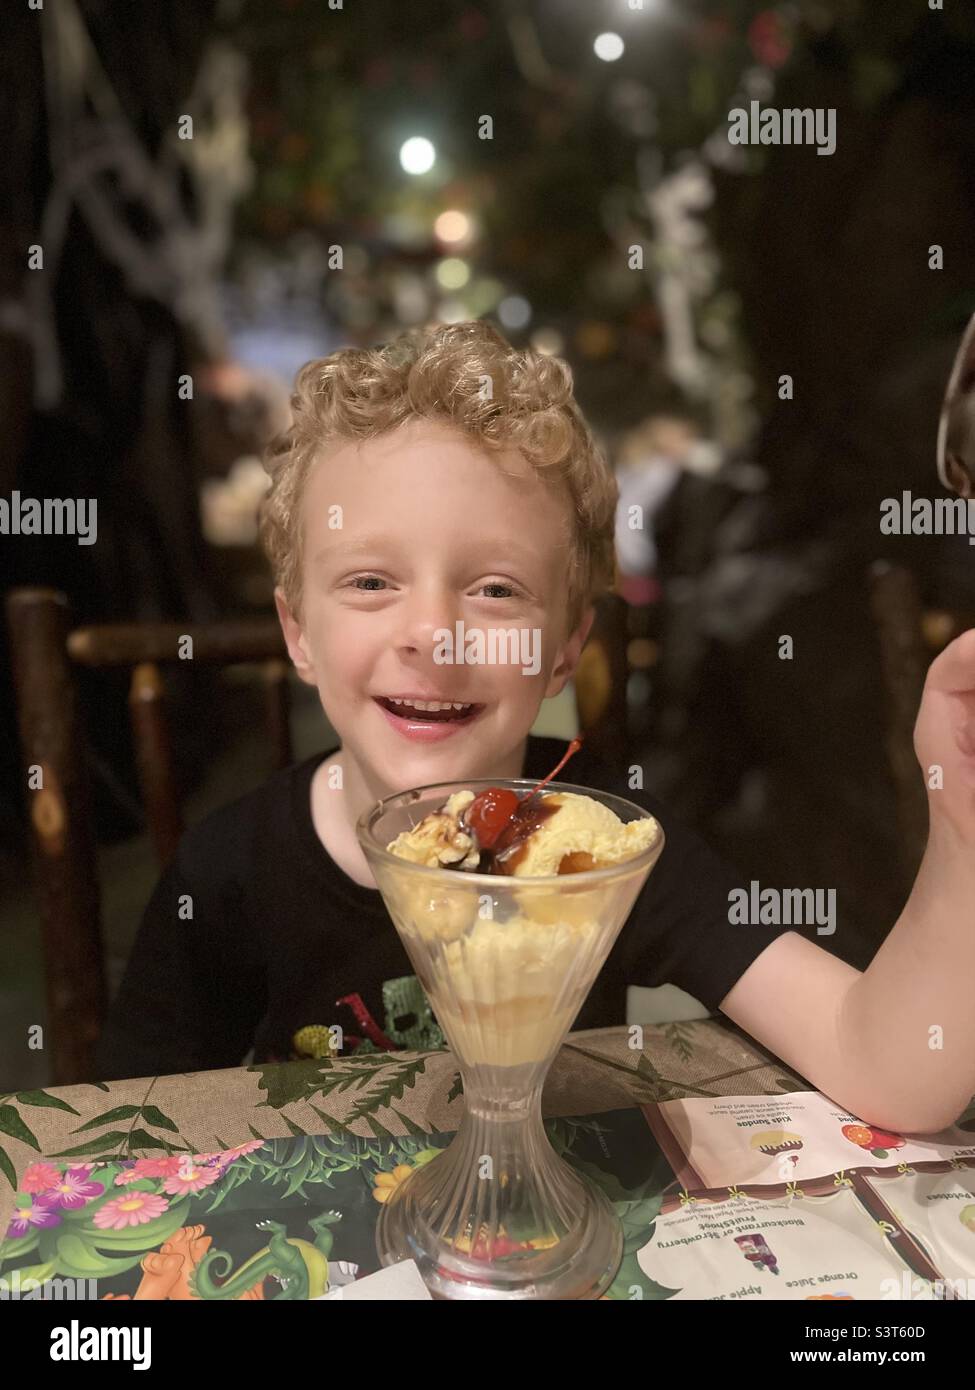 A young 4 year old boy with tight curly blonde hair smiles whilst enjoying  a vanilla ice cream topped with caramel sauce and a Glaze cherry on top at a Cafe in the London Theatre area of England. Stock Photo